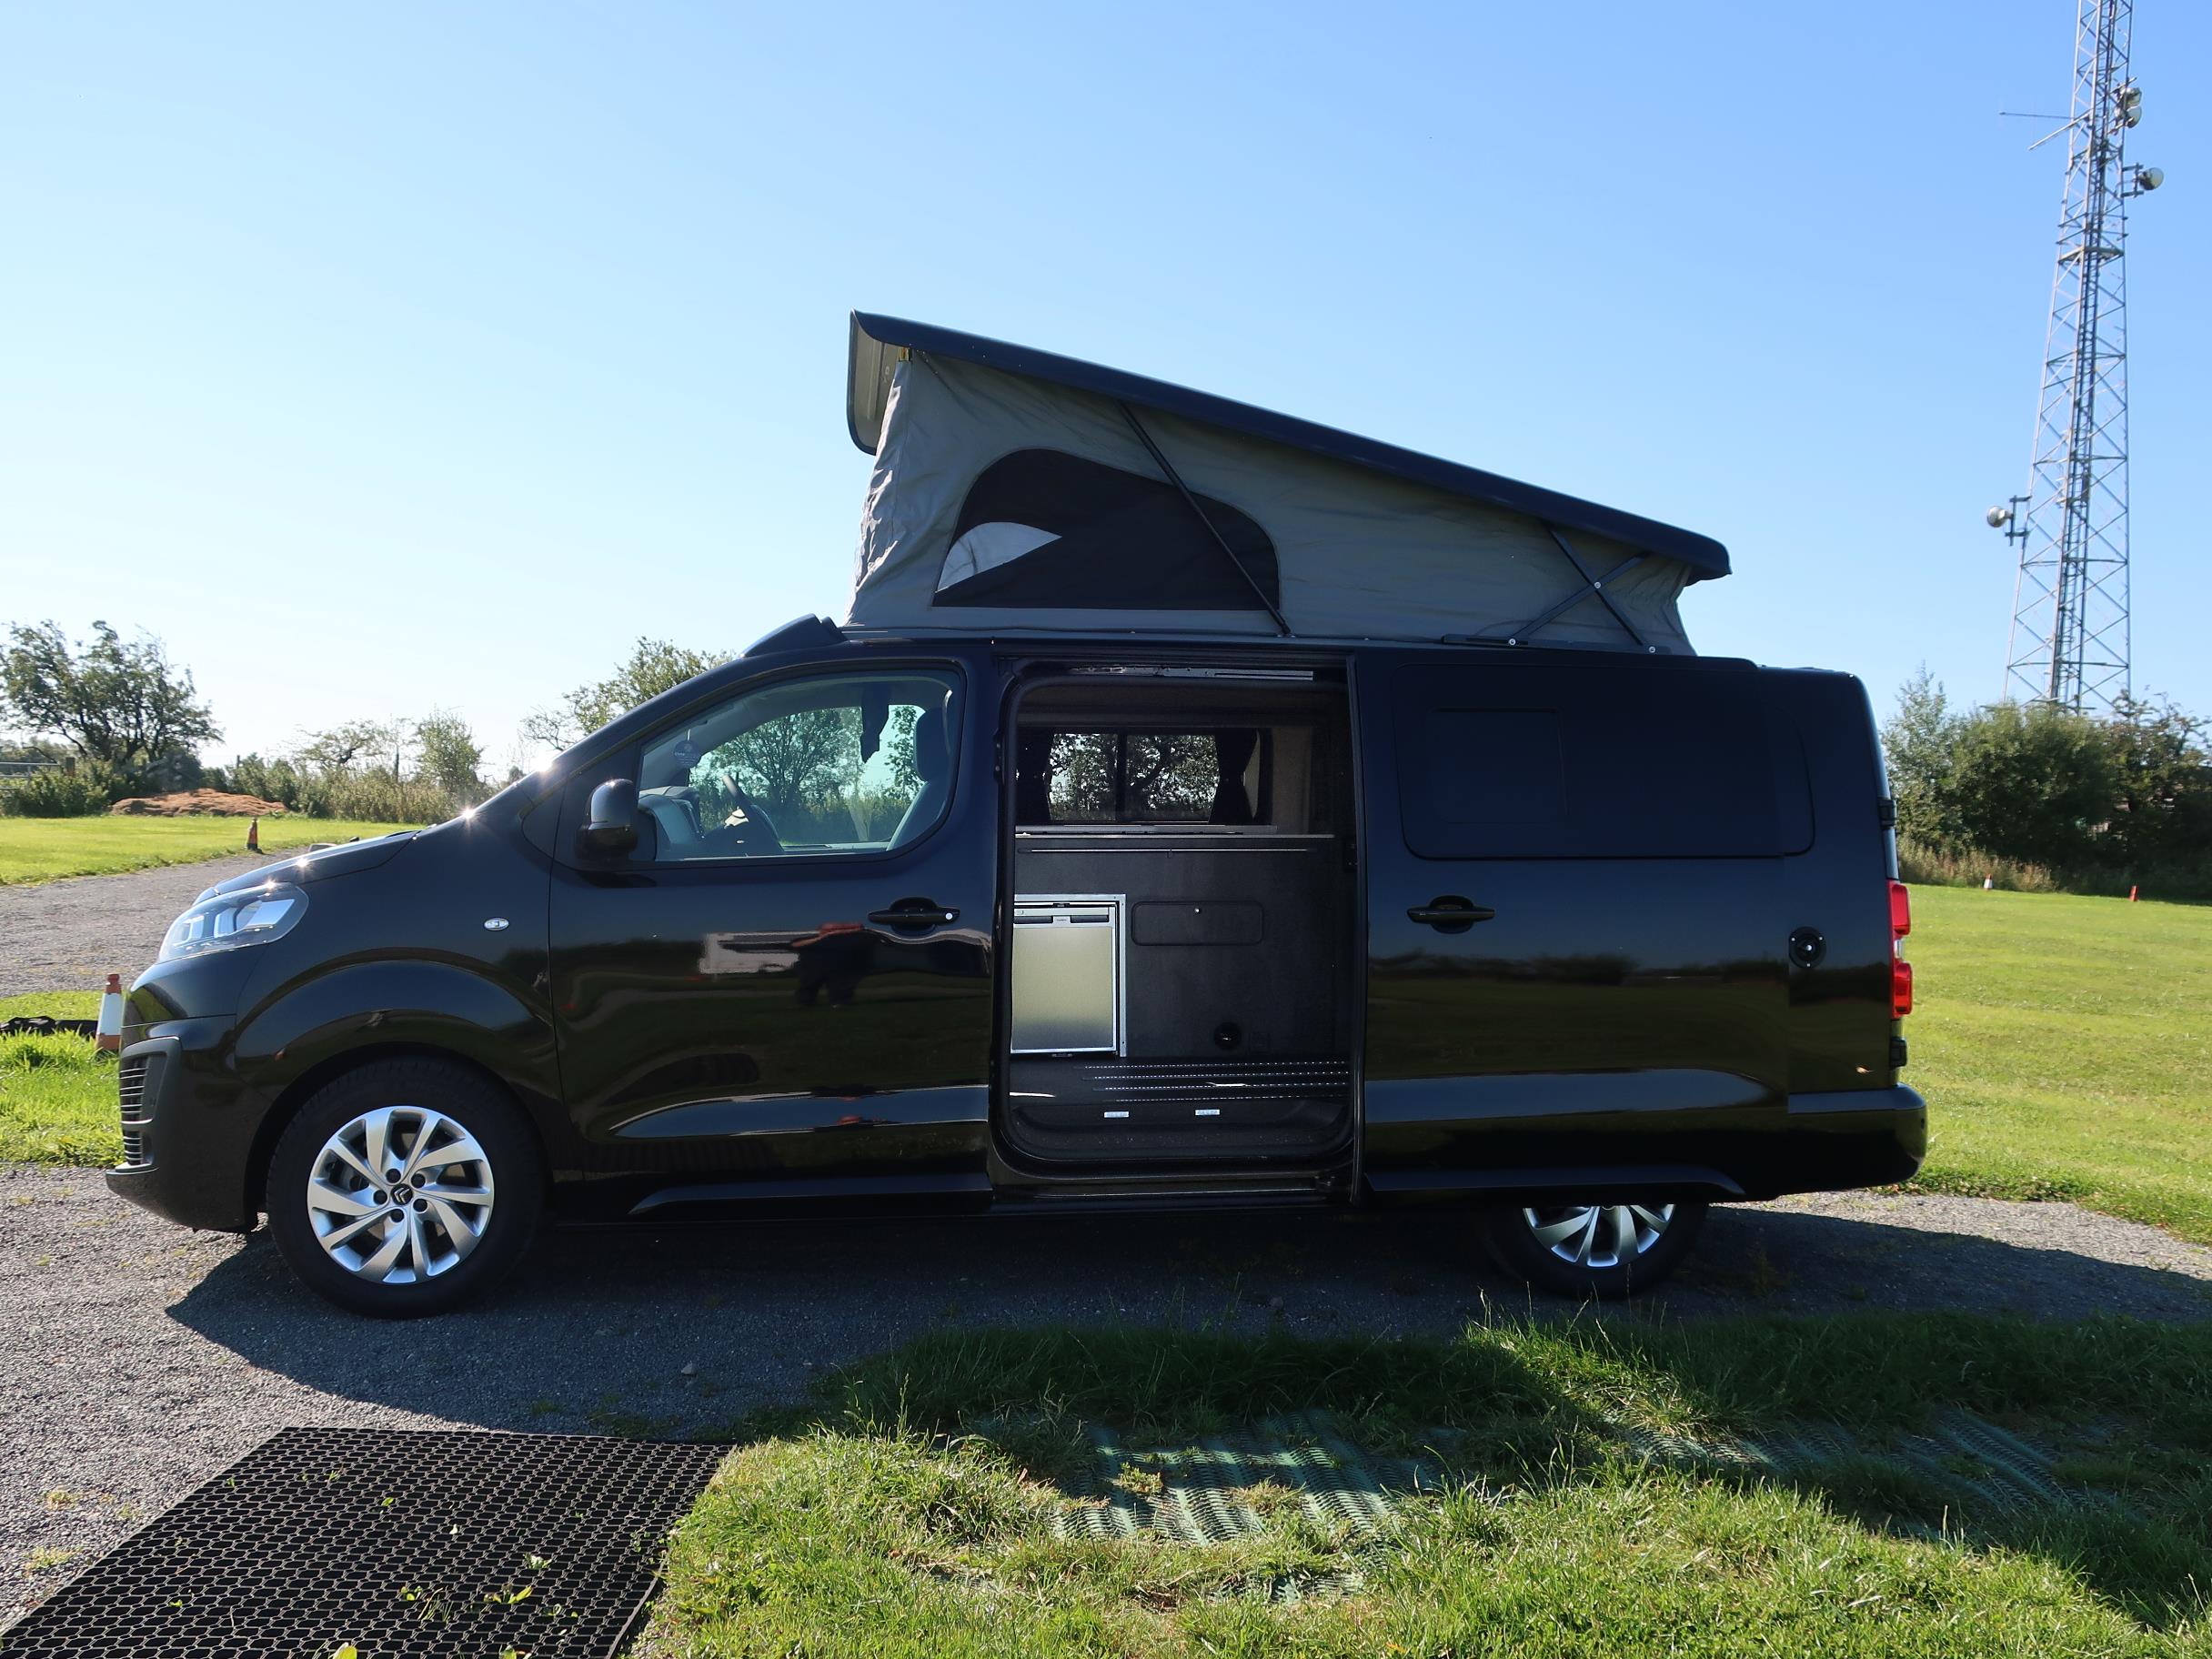 Brand New Citroen Dispatch XL 4 Berth 4 Travelling Campervan in Black For Sale with Black Pop Top Roof Rock and Roll Bed and Solar Panel - Pop Top Roof 8